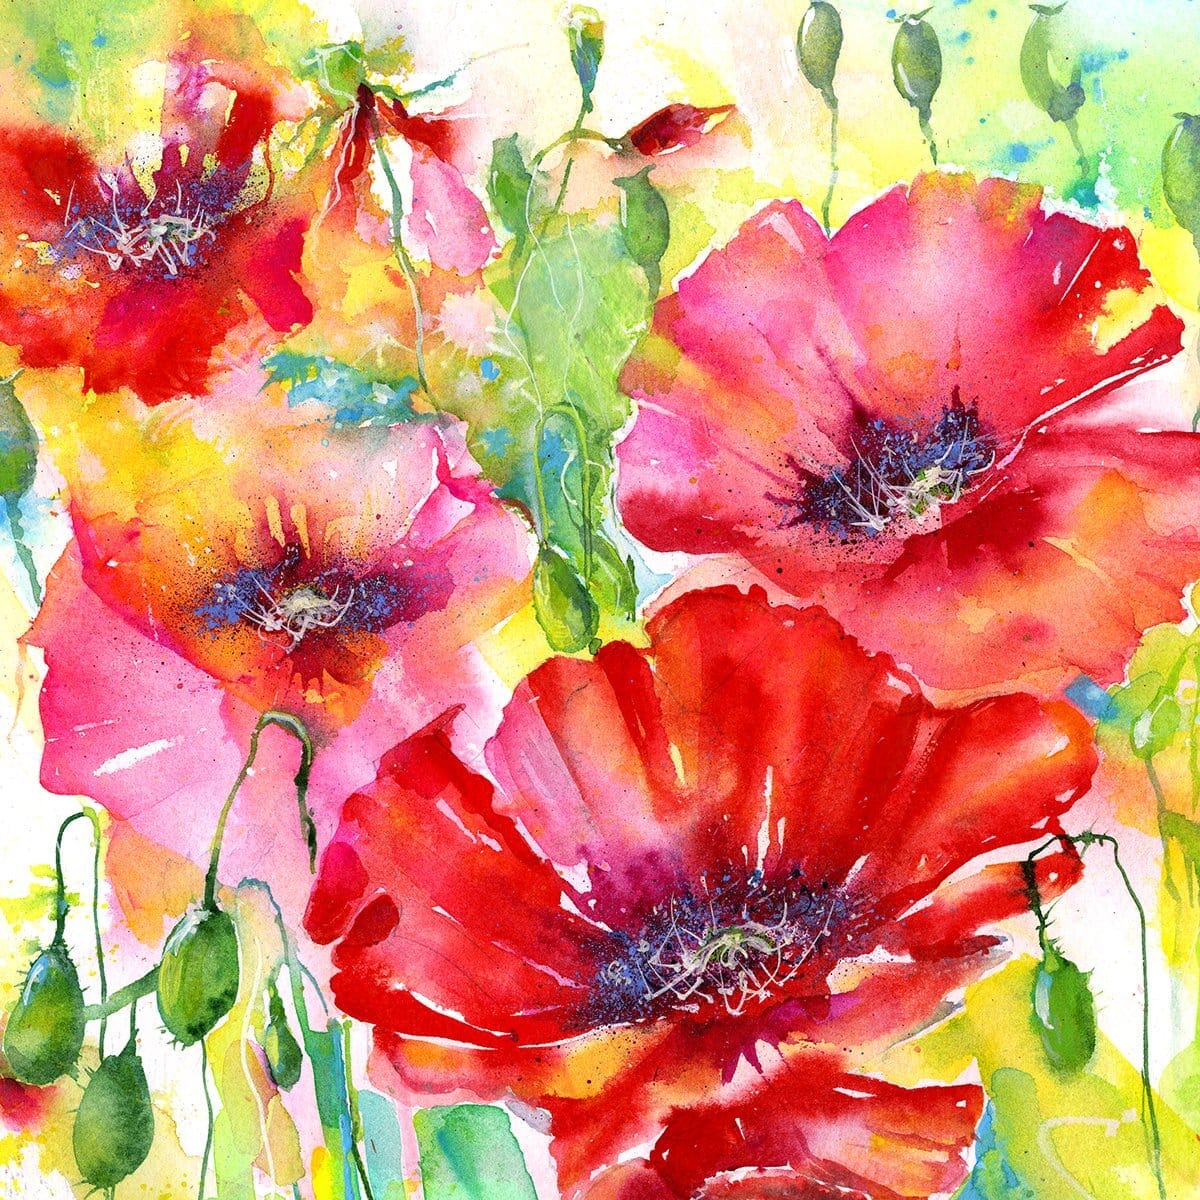 Red Poppies Greeting Card designed by artist Sheila Gill